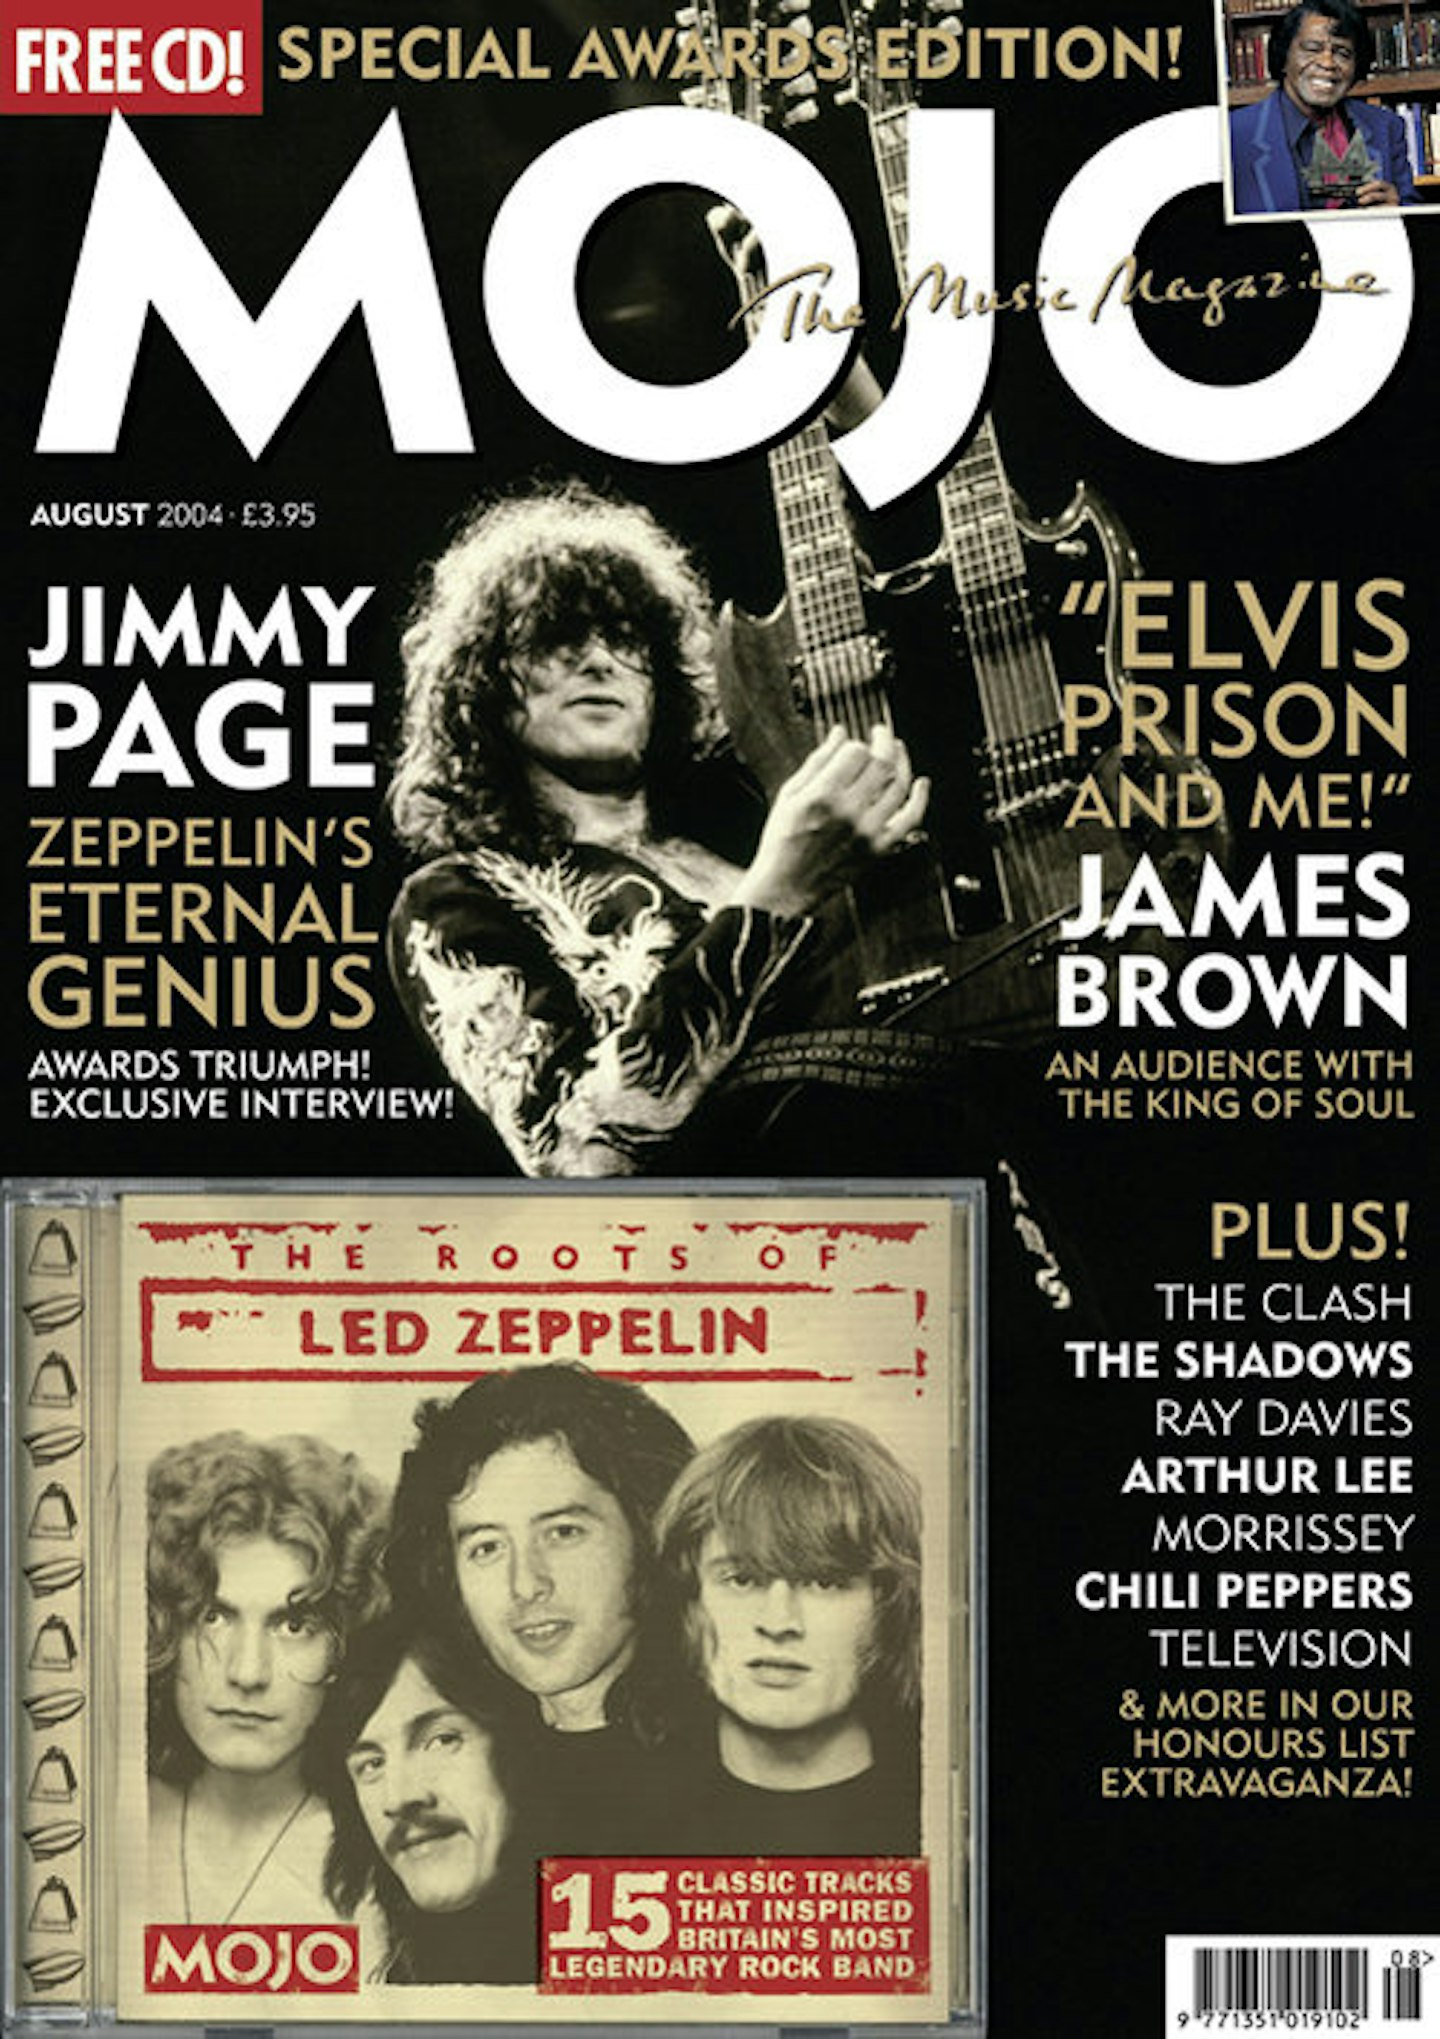 MOJO Issue 129 / August 2004